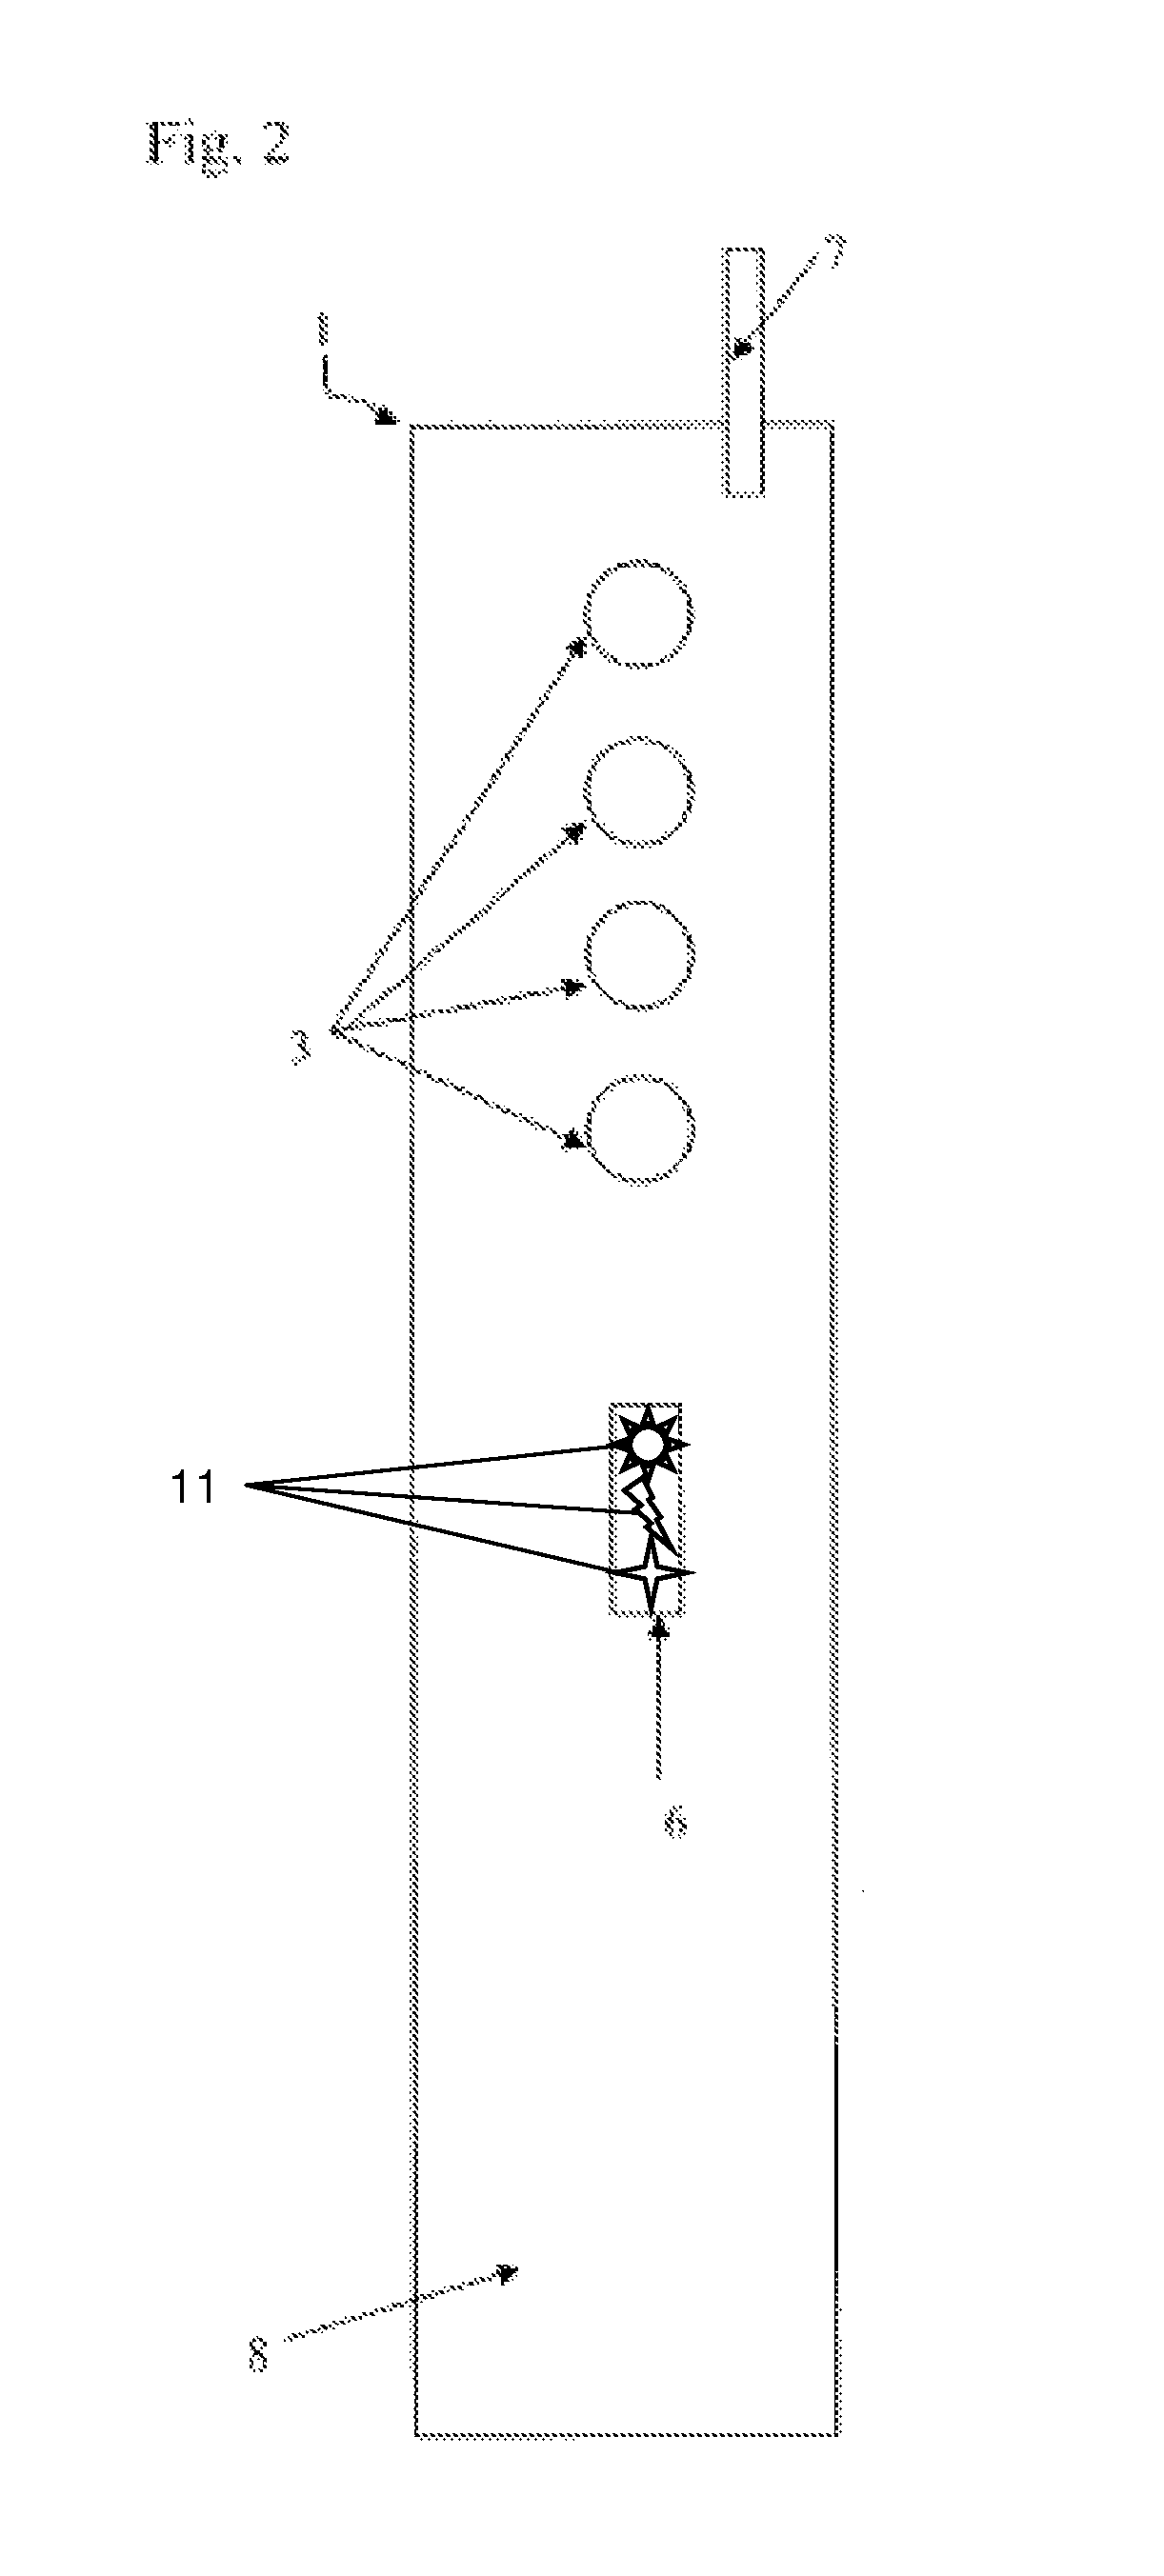 Functional identifiers on wireless devices for gaming/wagering/lottery applications and methods of using same